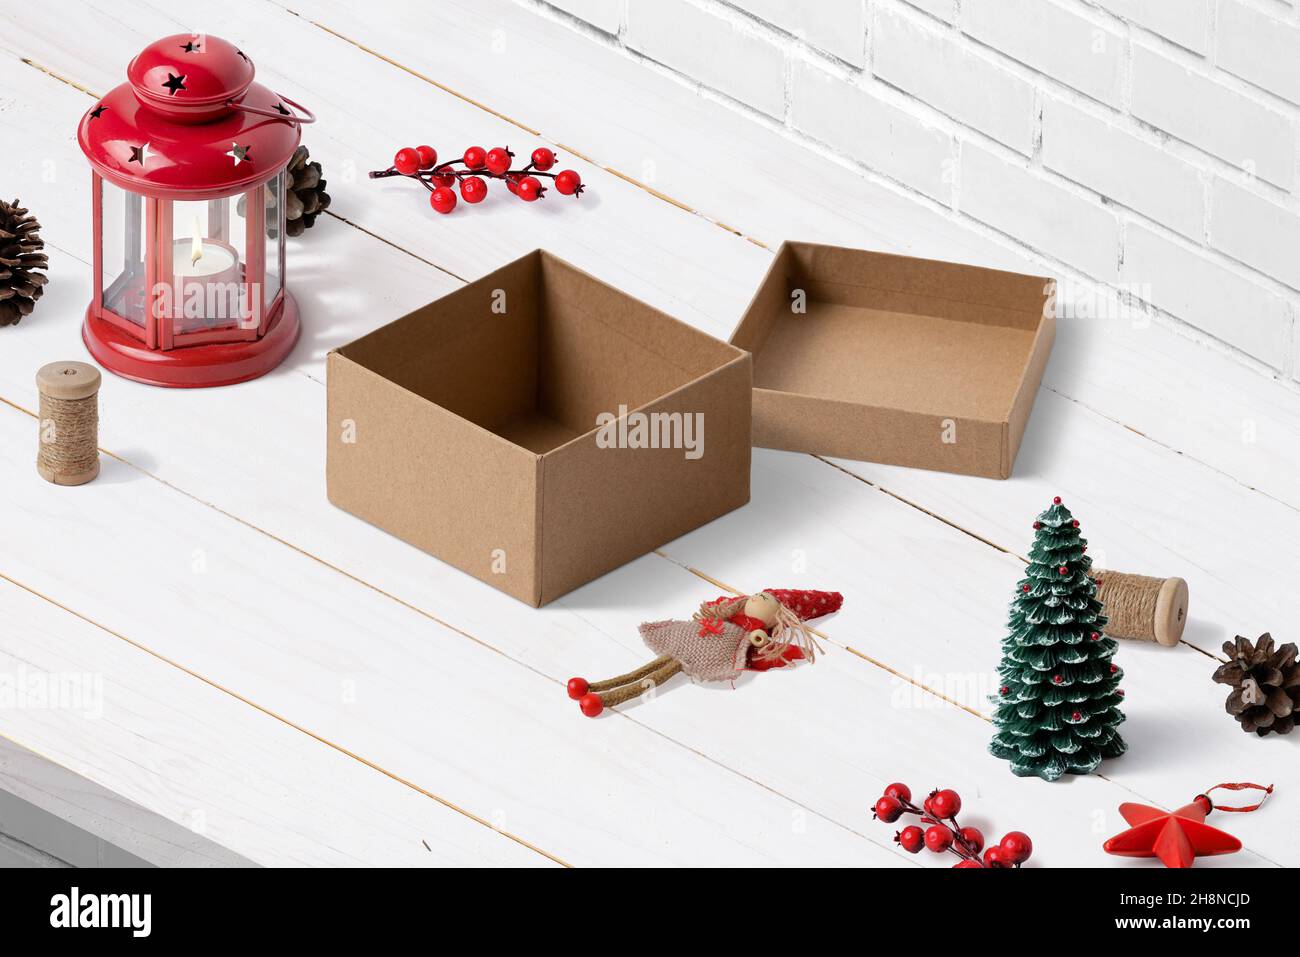 Unpacking a Christmas present. Box, a doll and Christmas decorations with a lantern on desk. Isometric composition Stock Photo